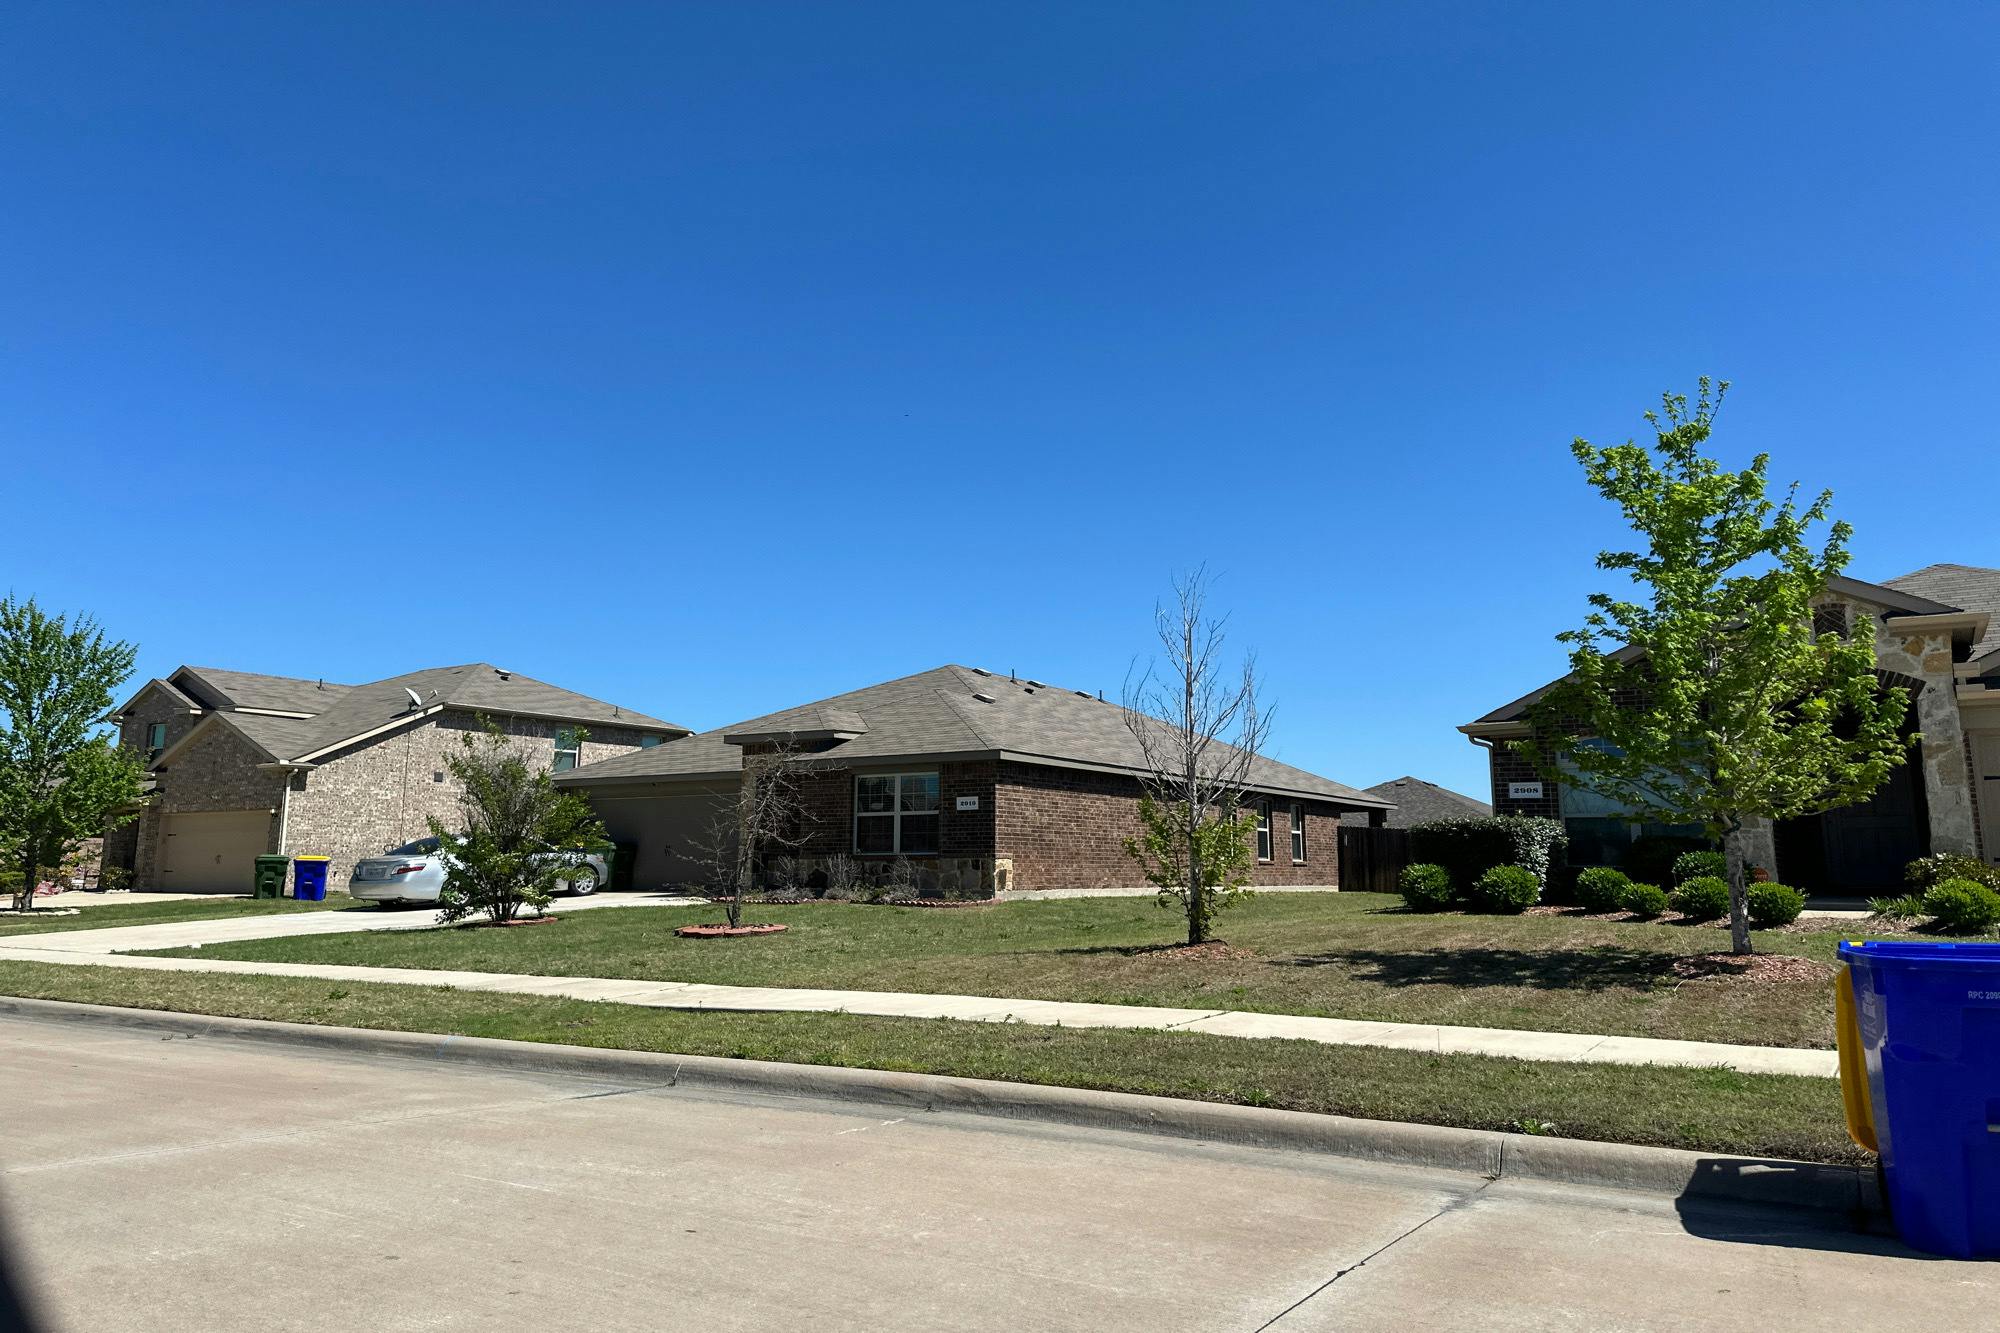 Balleywood Dr, Seagoville, TX 75159 #1